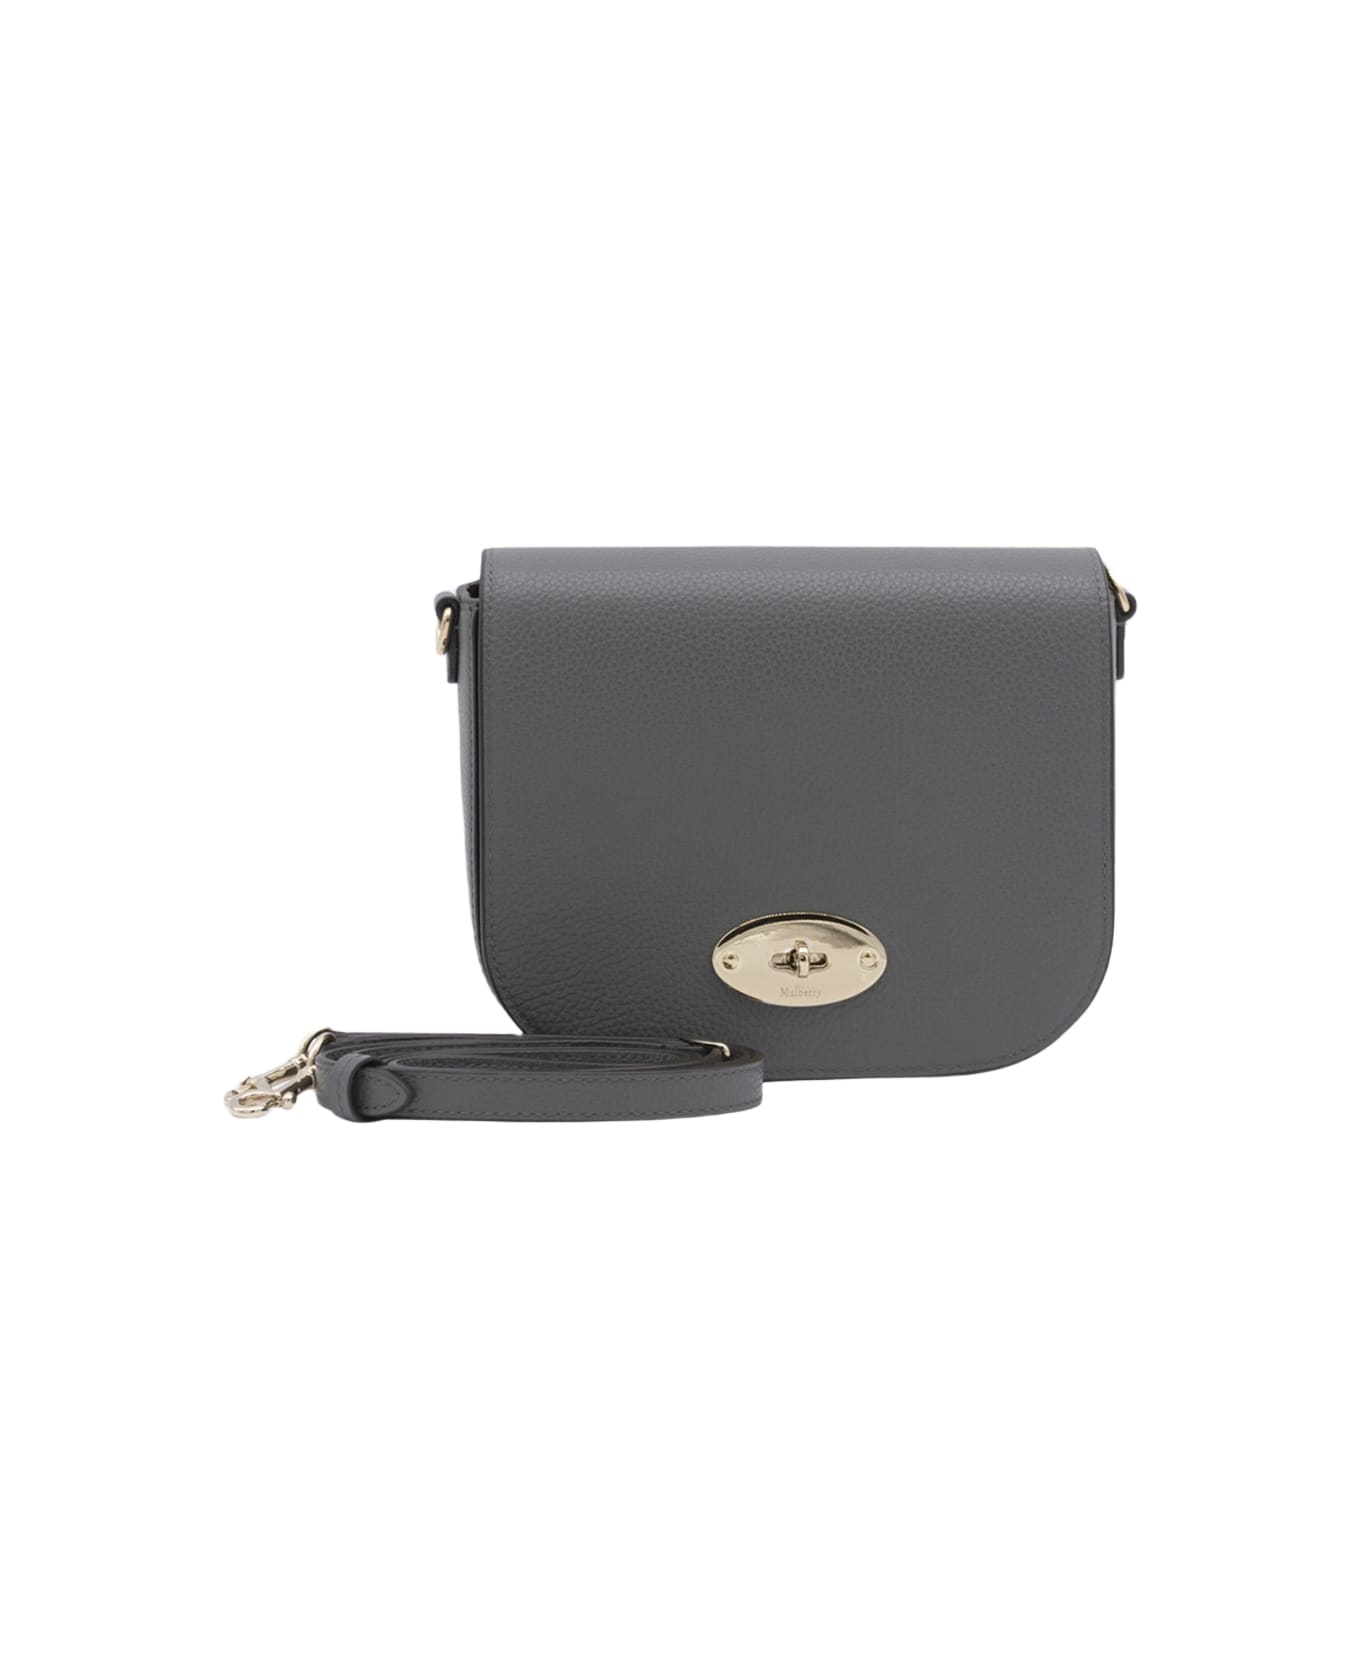 Mulberry Grey Leather Darley Crossbody Bag - Charcoal